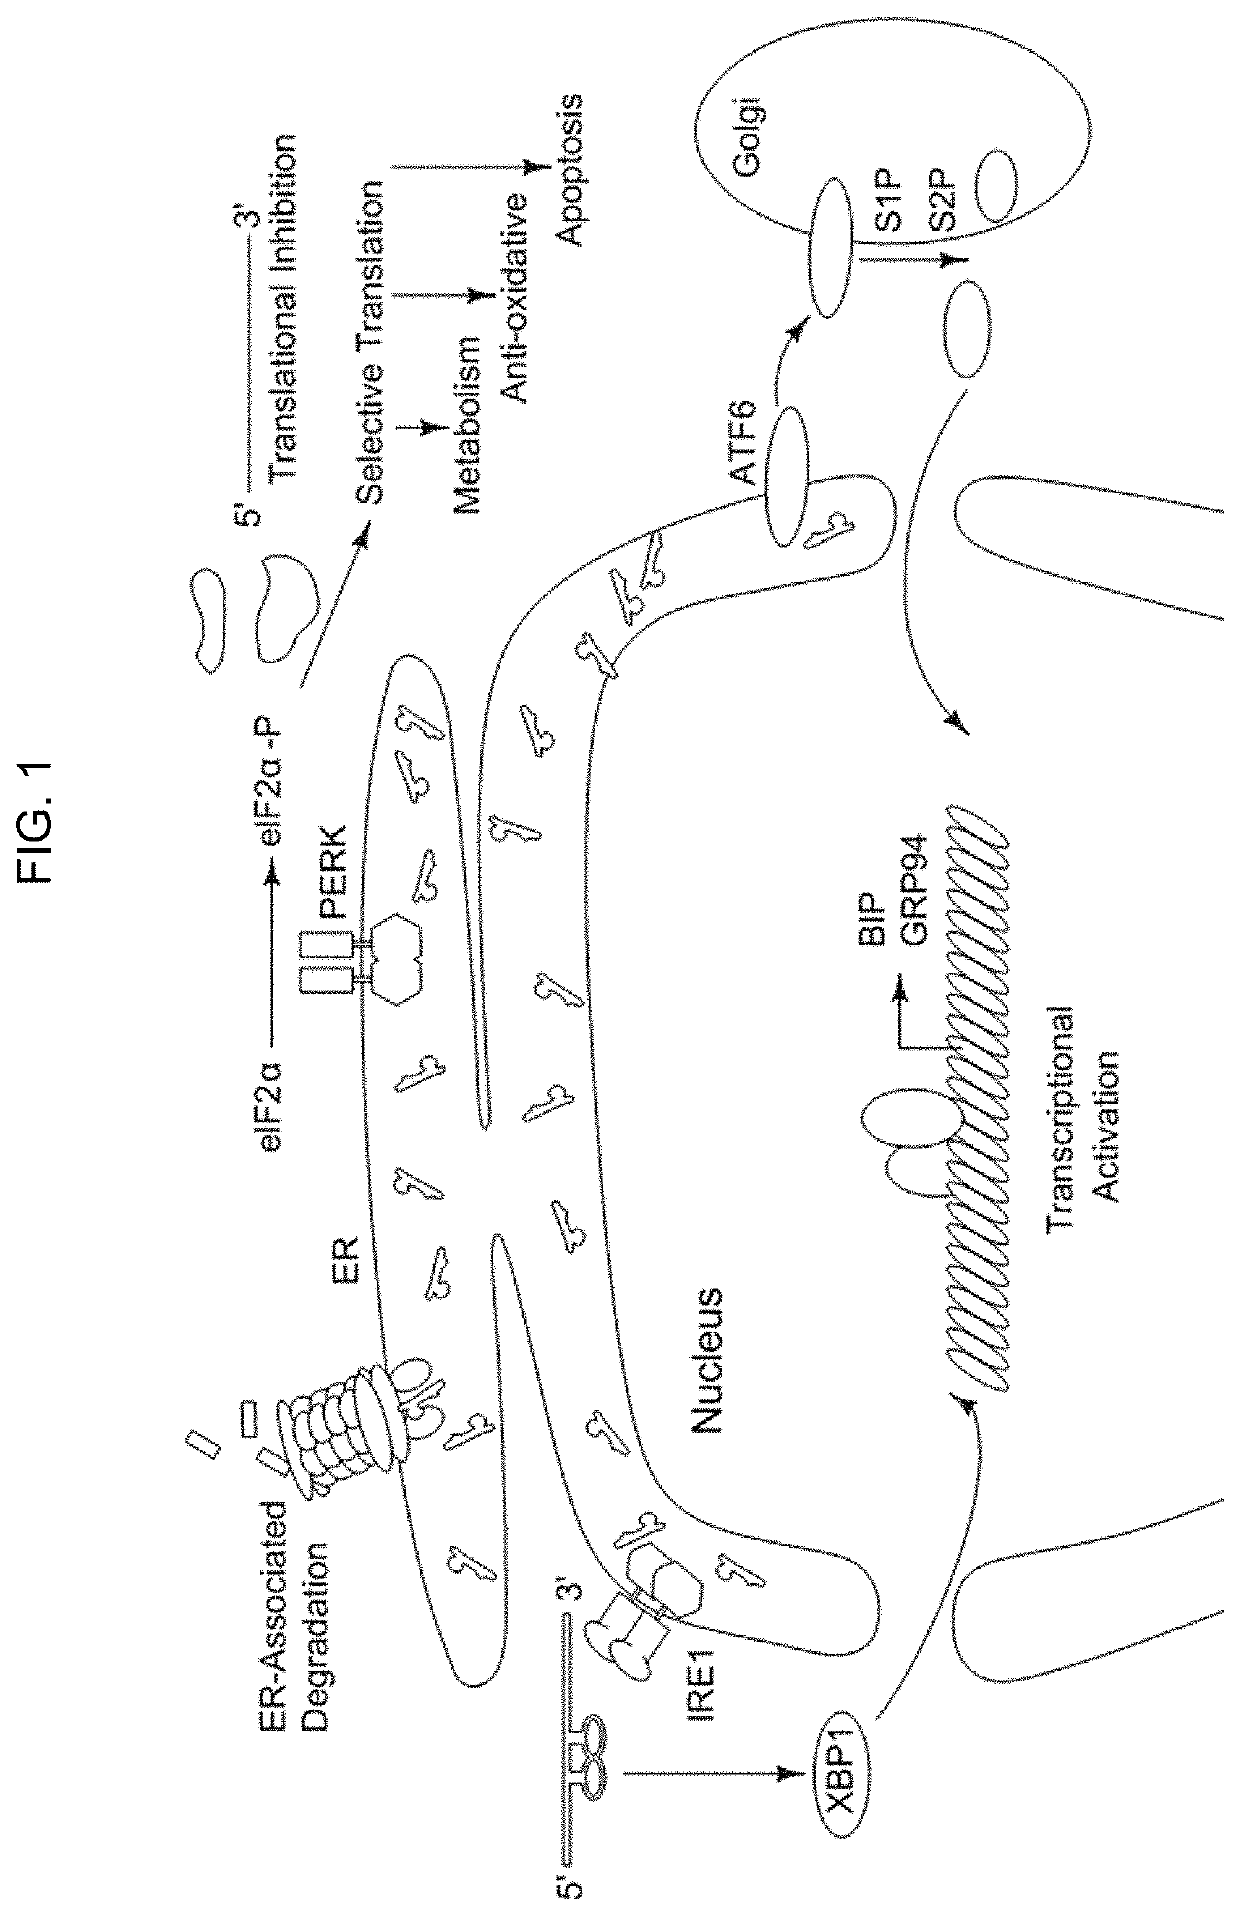 Compositions and methods to promote wound healing